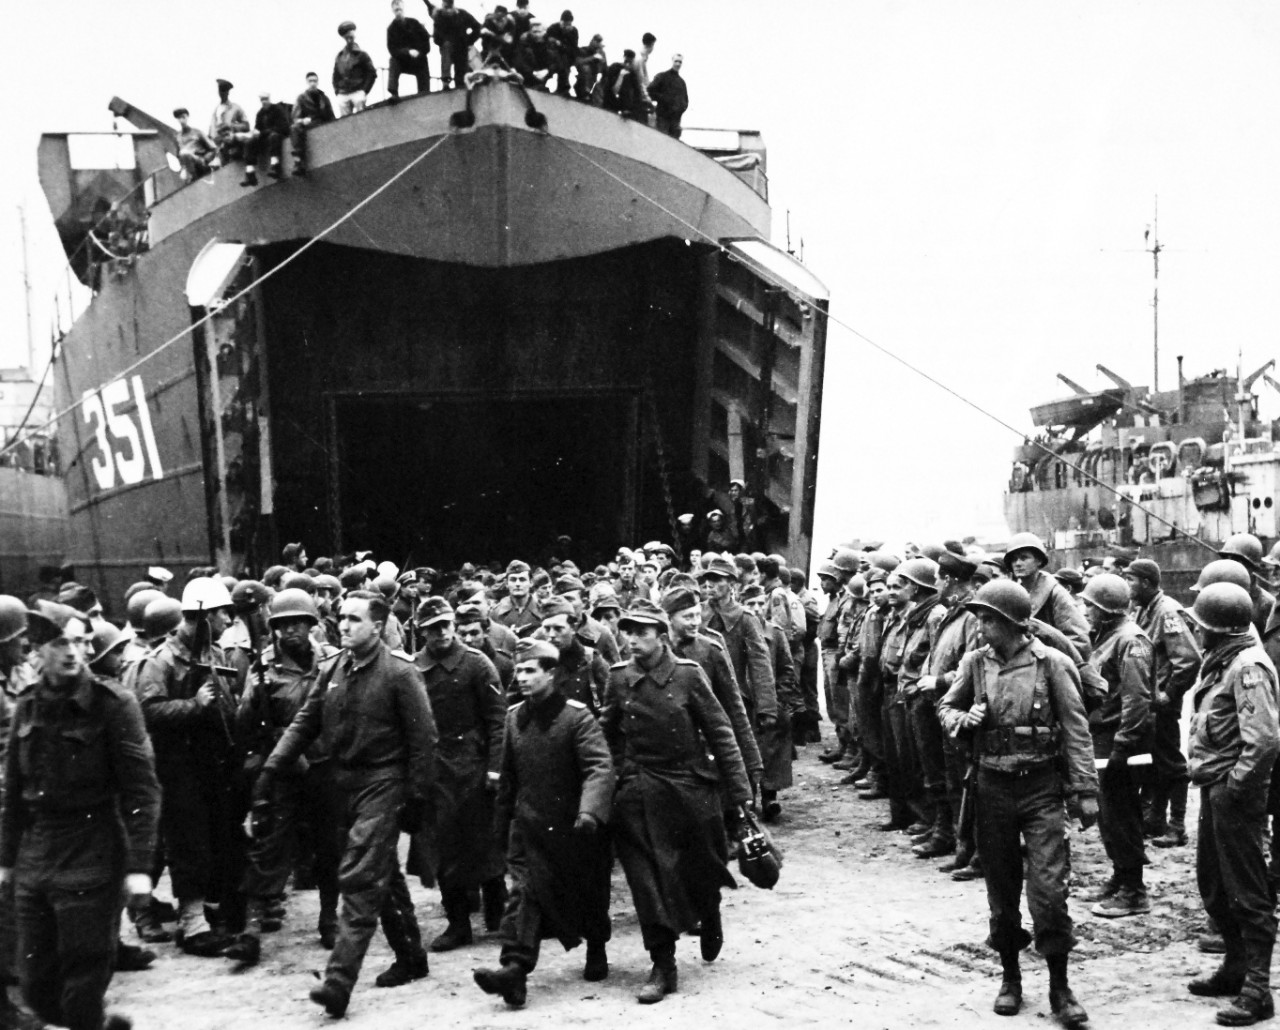 80-G-54415:   Battle of Anzio, January-June 1944.   German Prisoners at the Anzio Beachhead below Rome, on their way to prison camp.  Note USS LST 351. Photograph released February 17, 1944.  Official U.S. Navy photograph, now in the collections of the National Archives.  (2016/06/28).